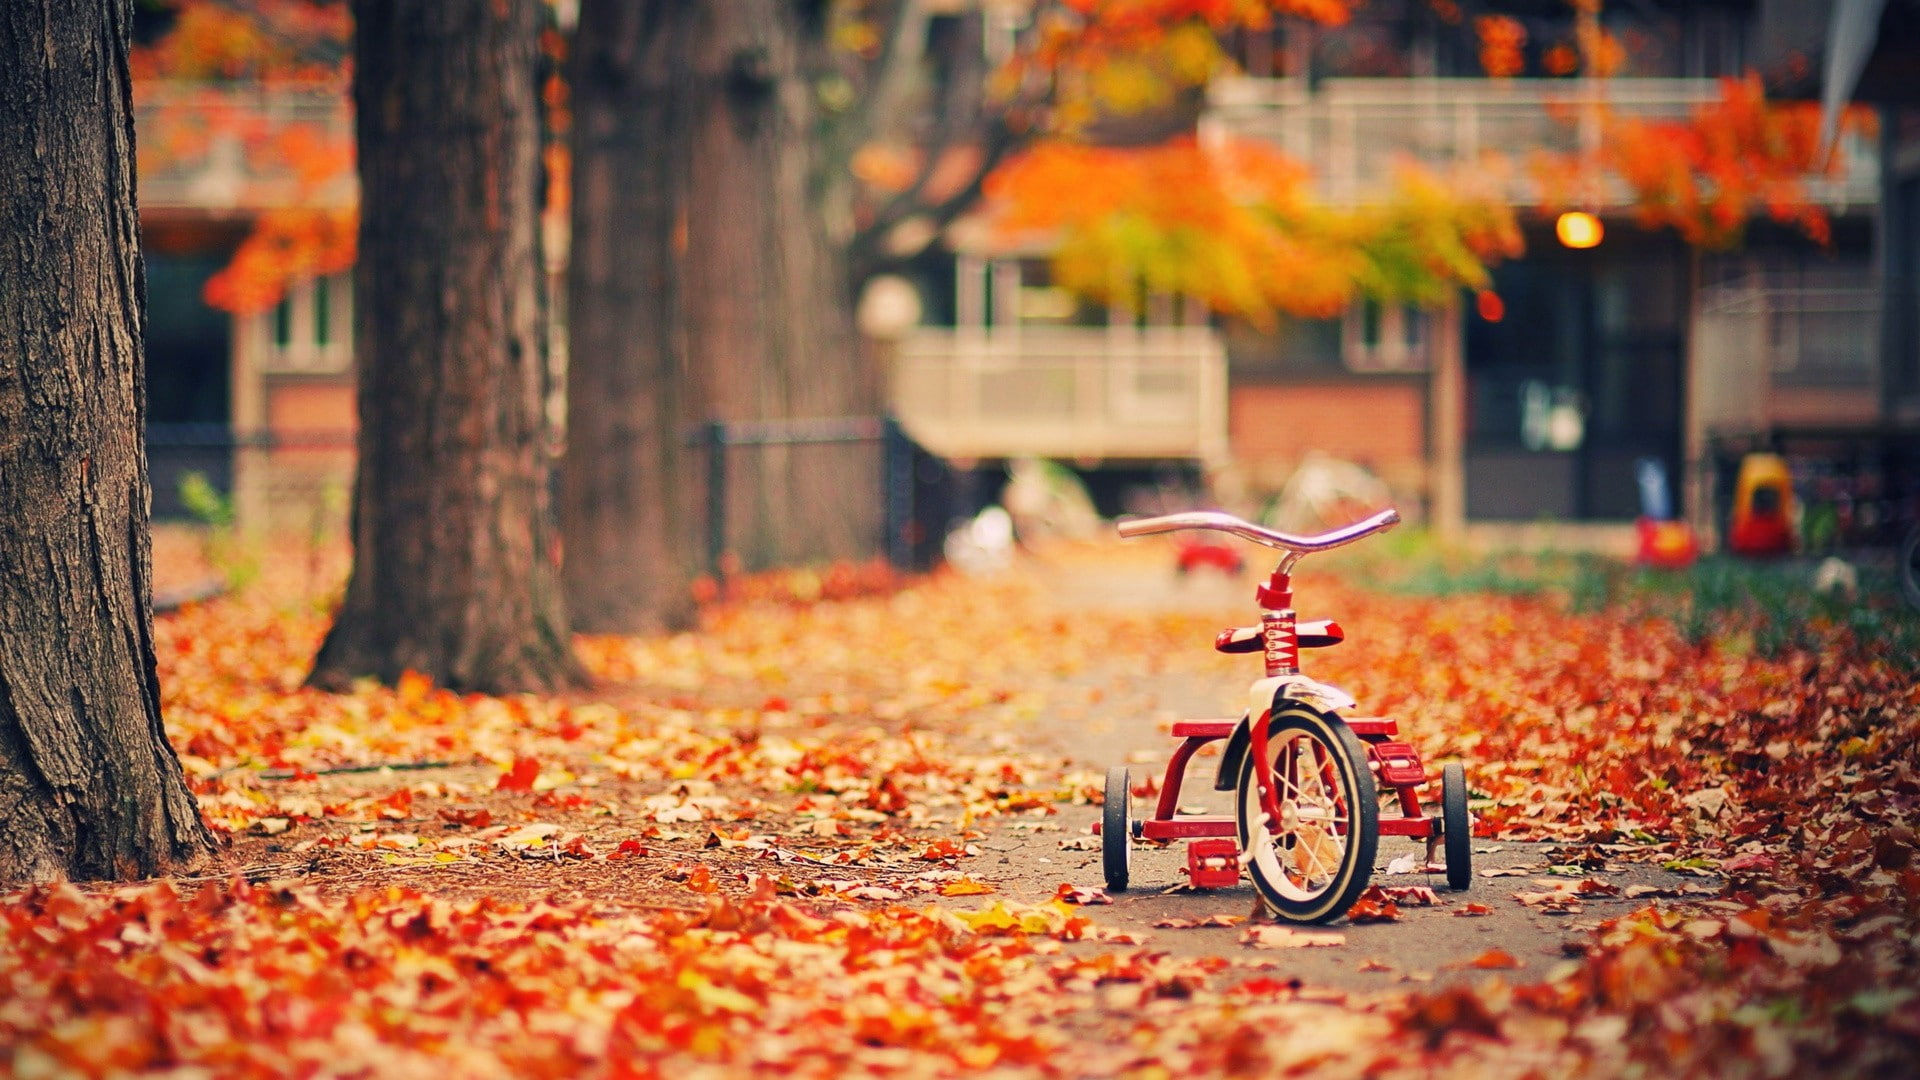 trees, leaves, vehicle, fall, tricycle